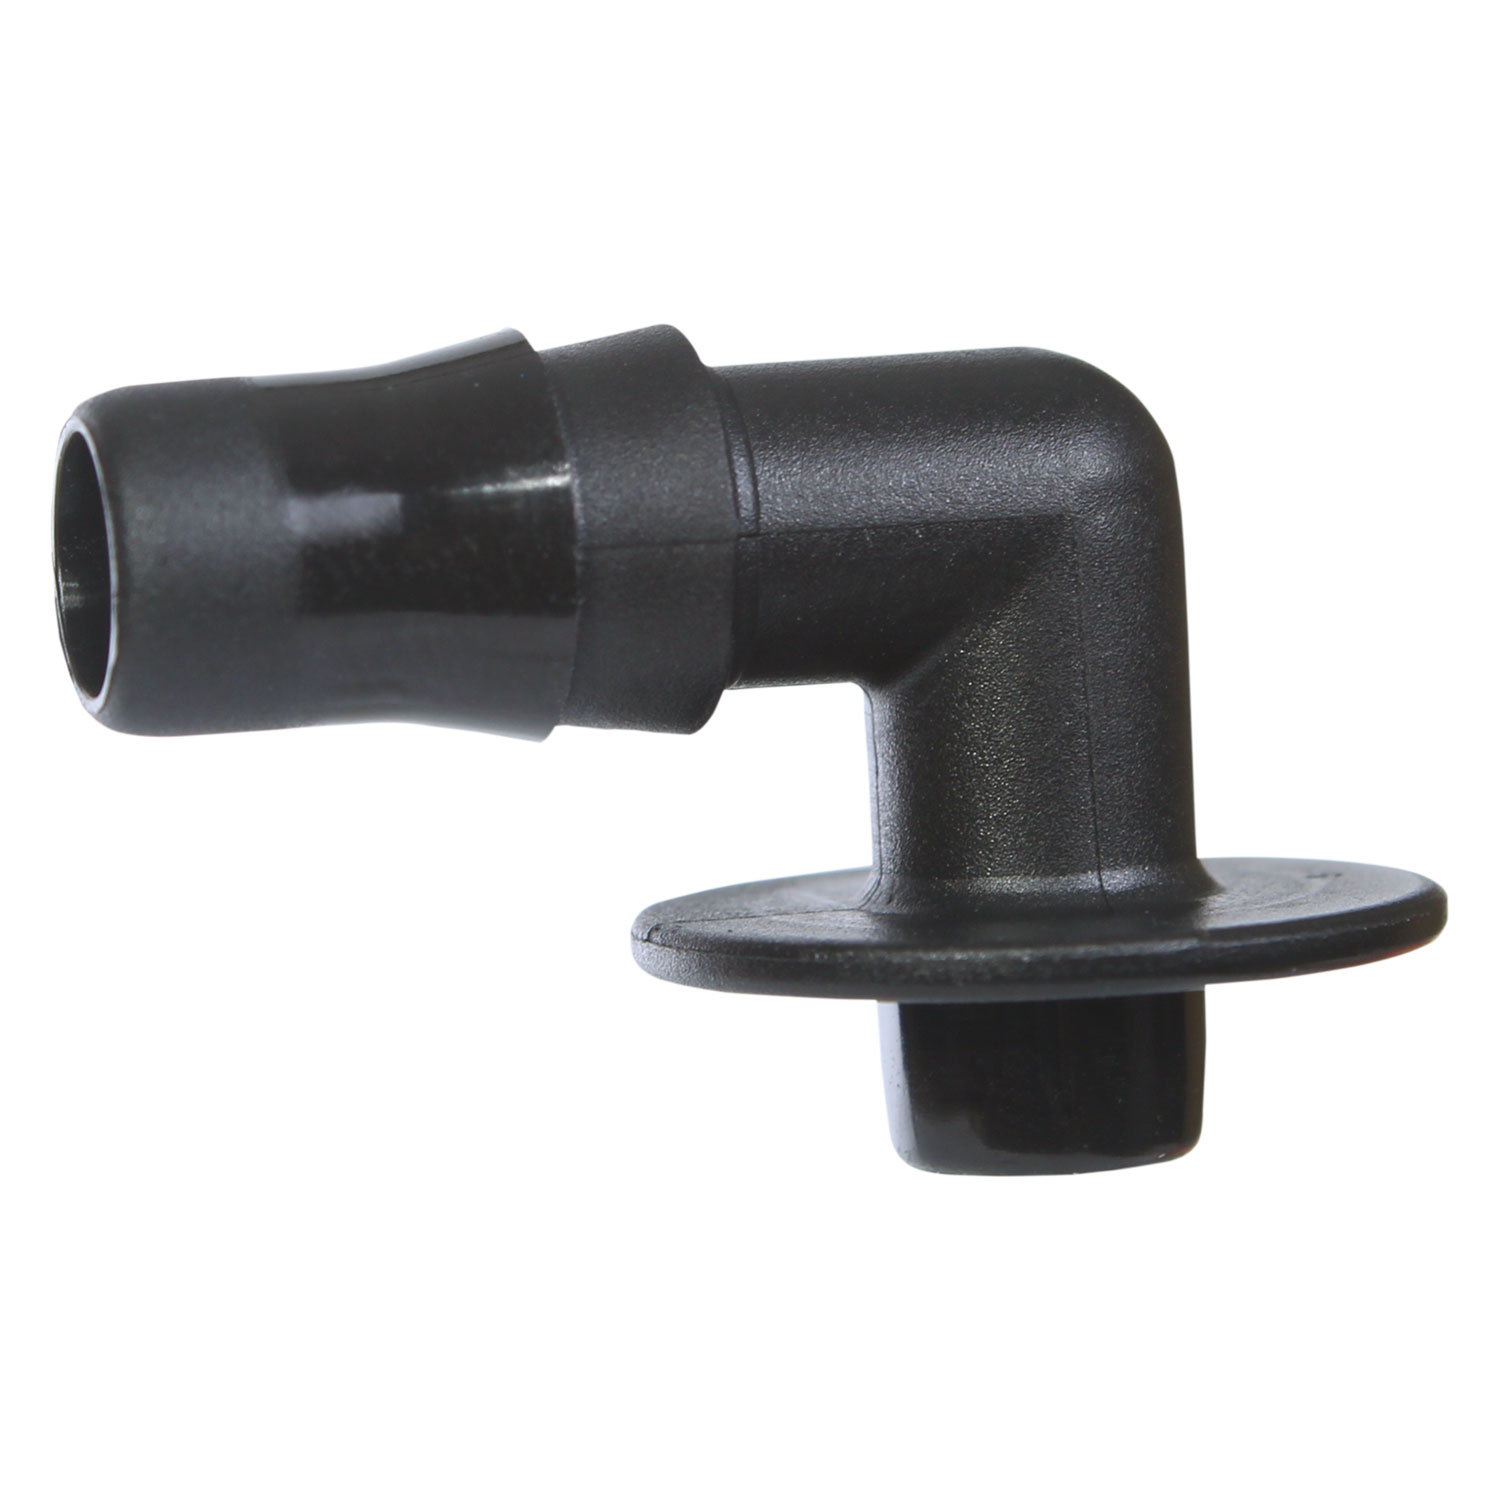 Saddle Elbow Connector for 5/16" tubing